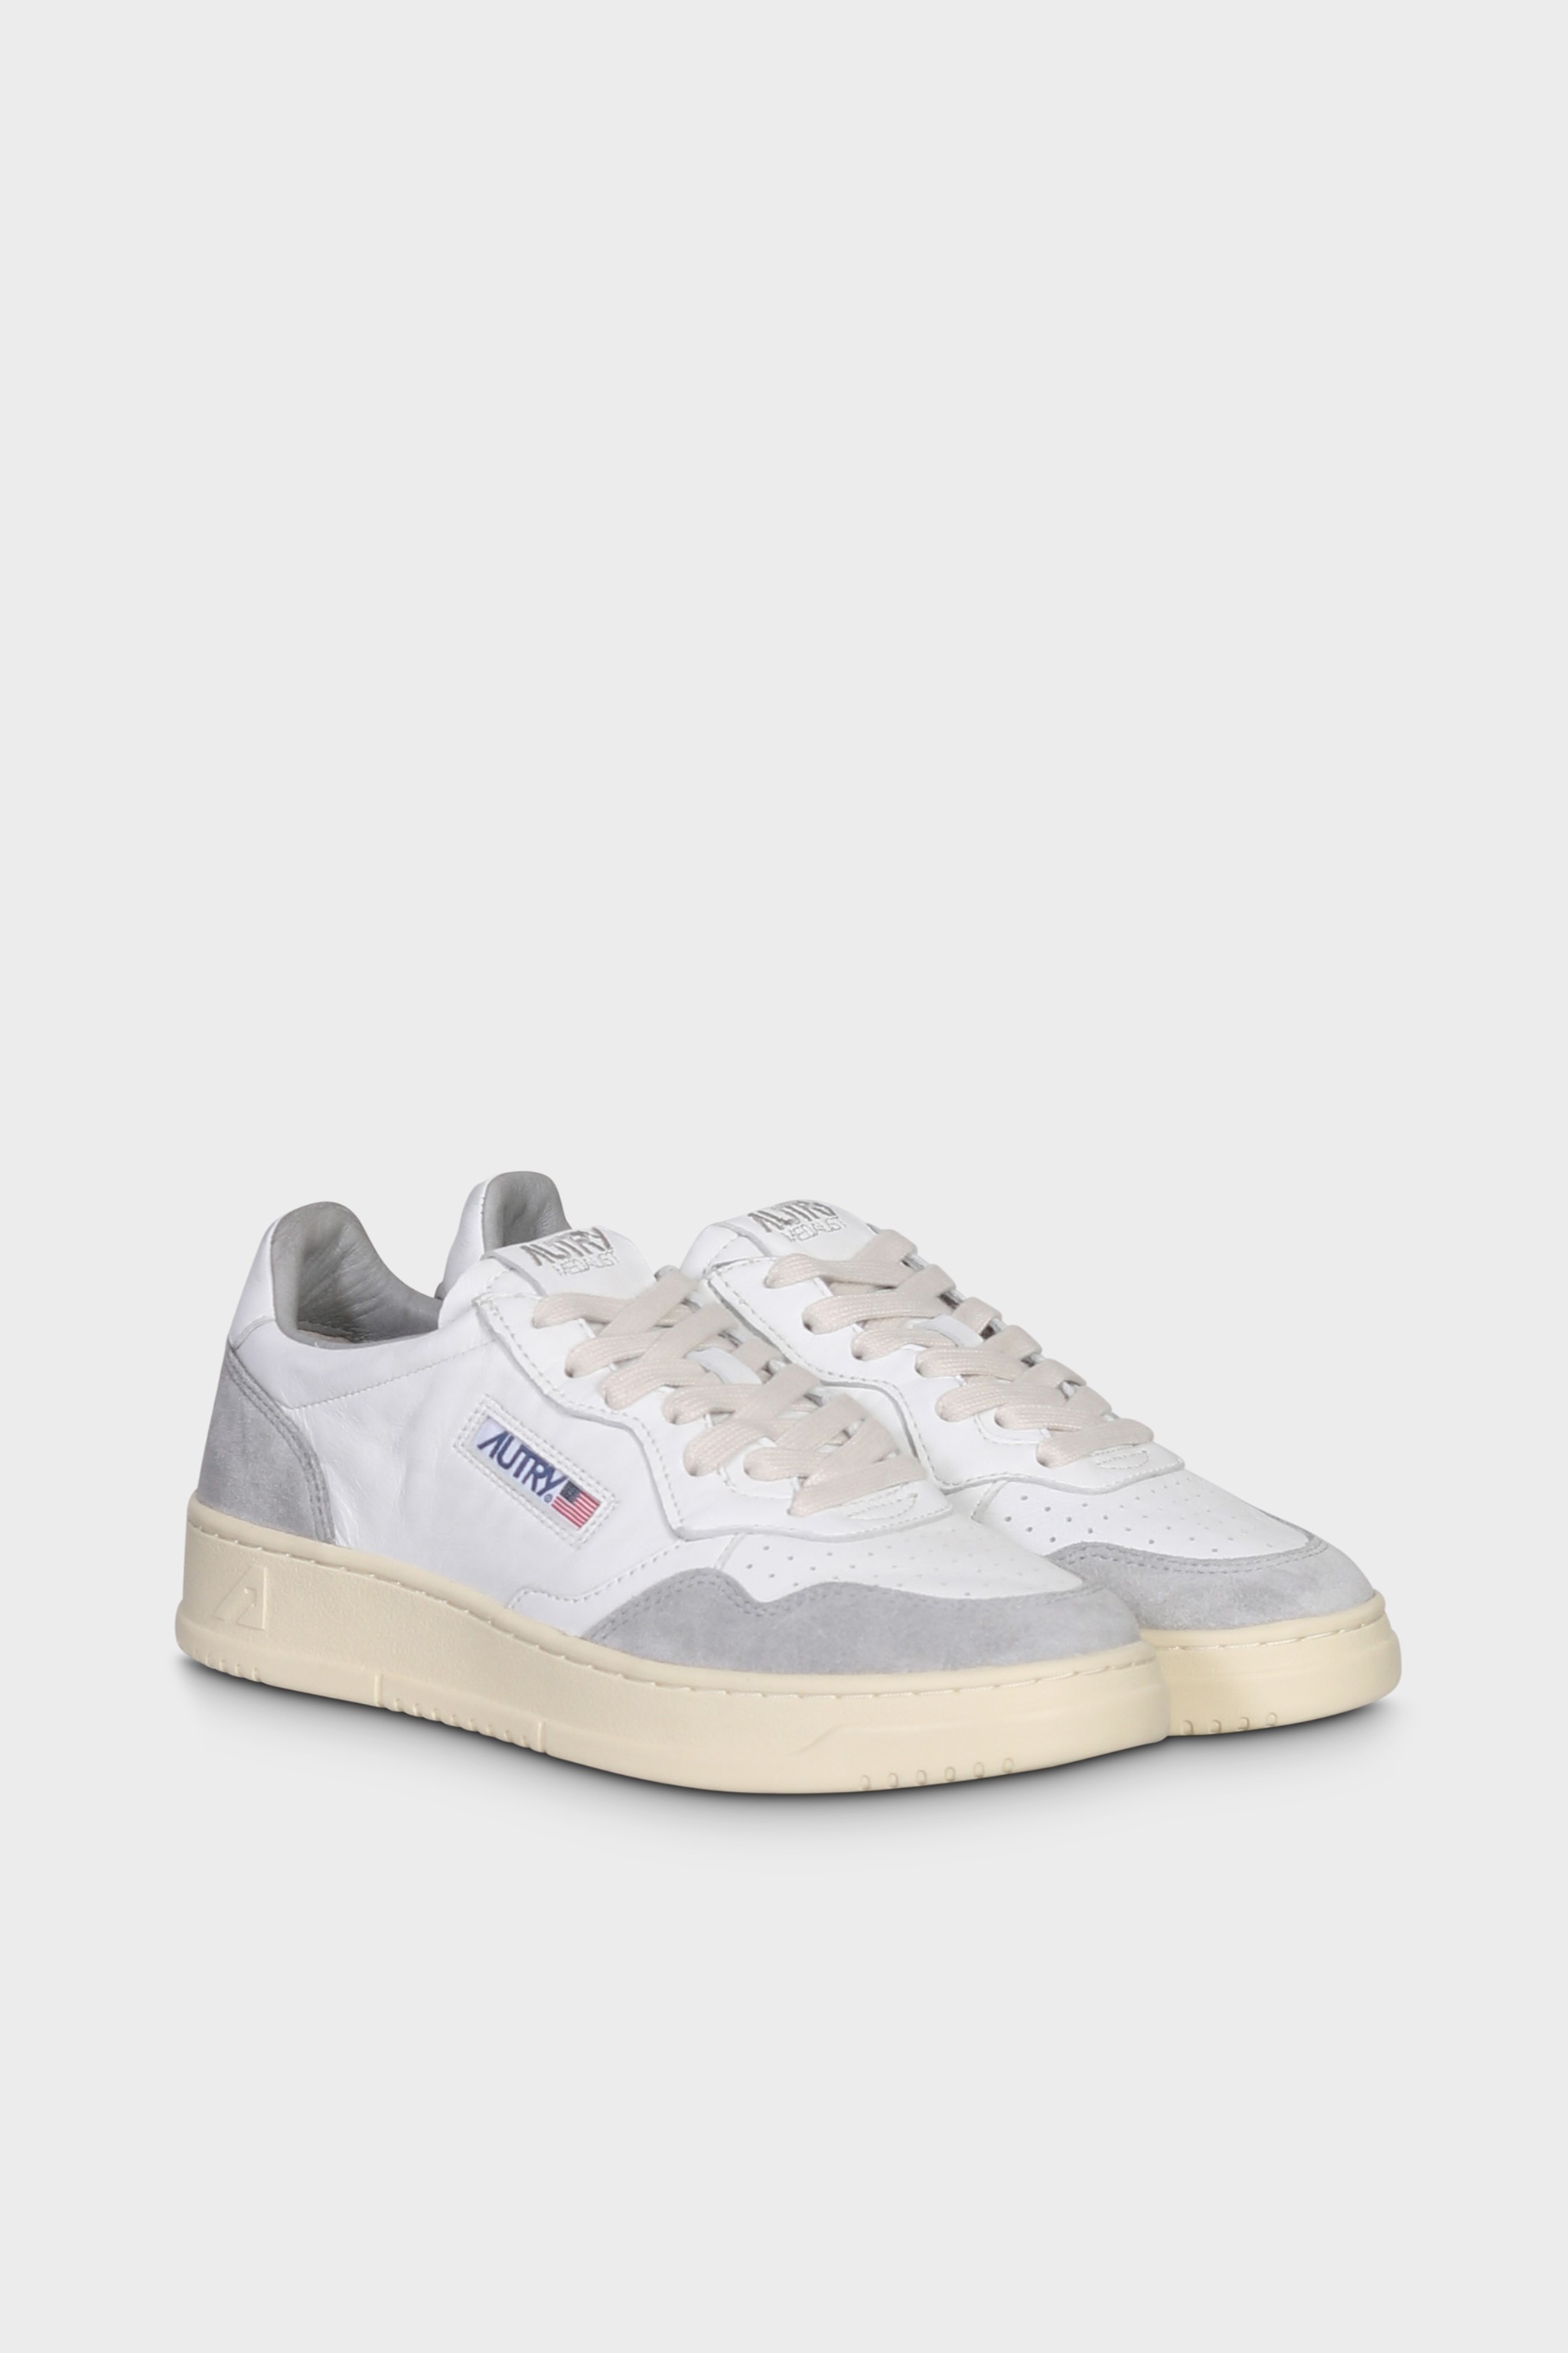 AUTRY ACTION SHOES Medalist Low Sneaker Goat Suede White/Grey 35